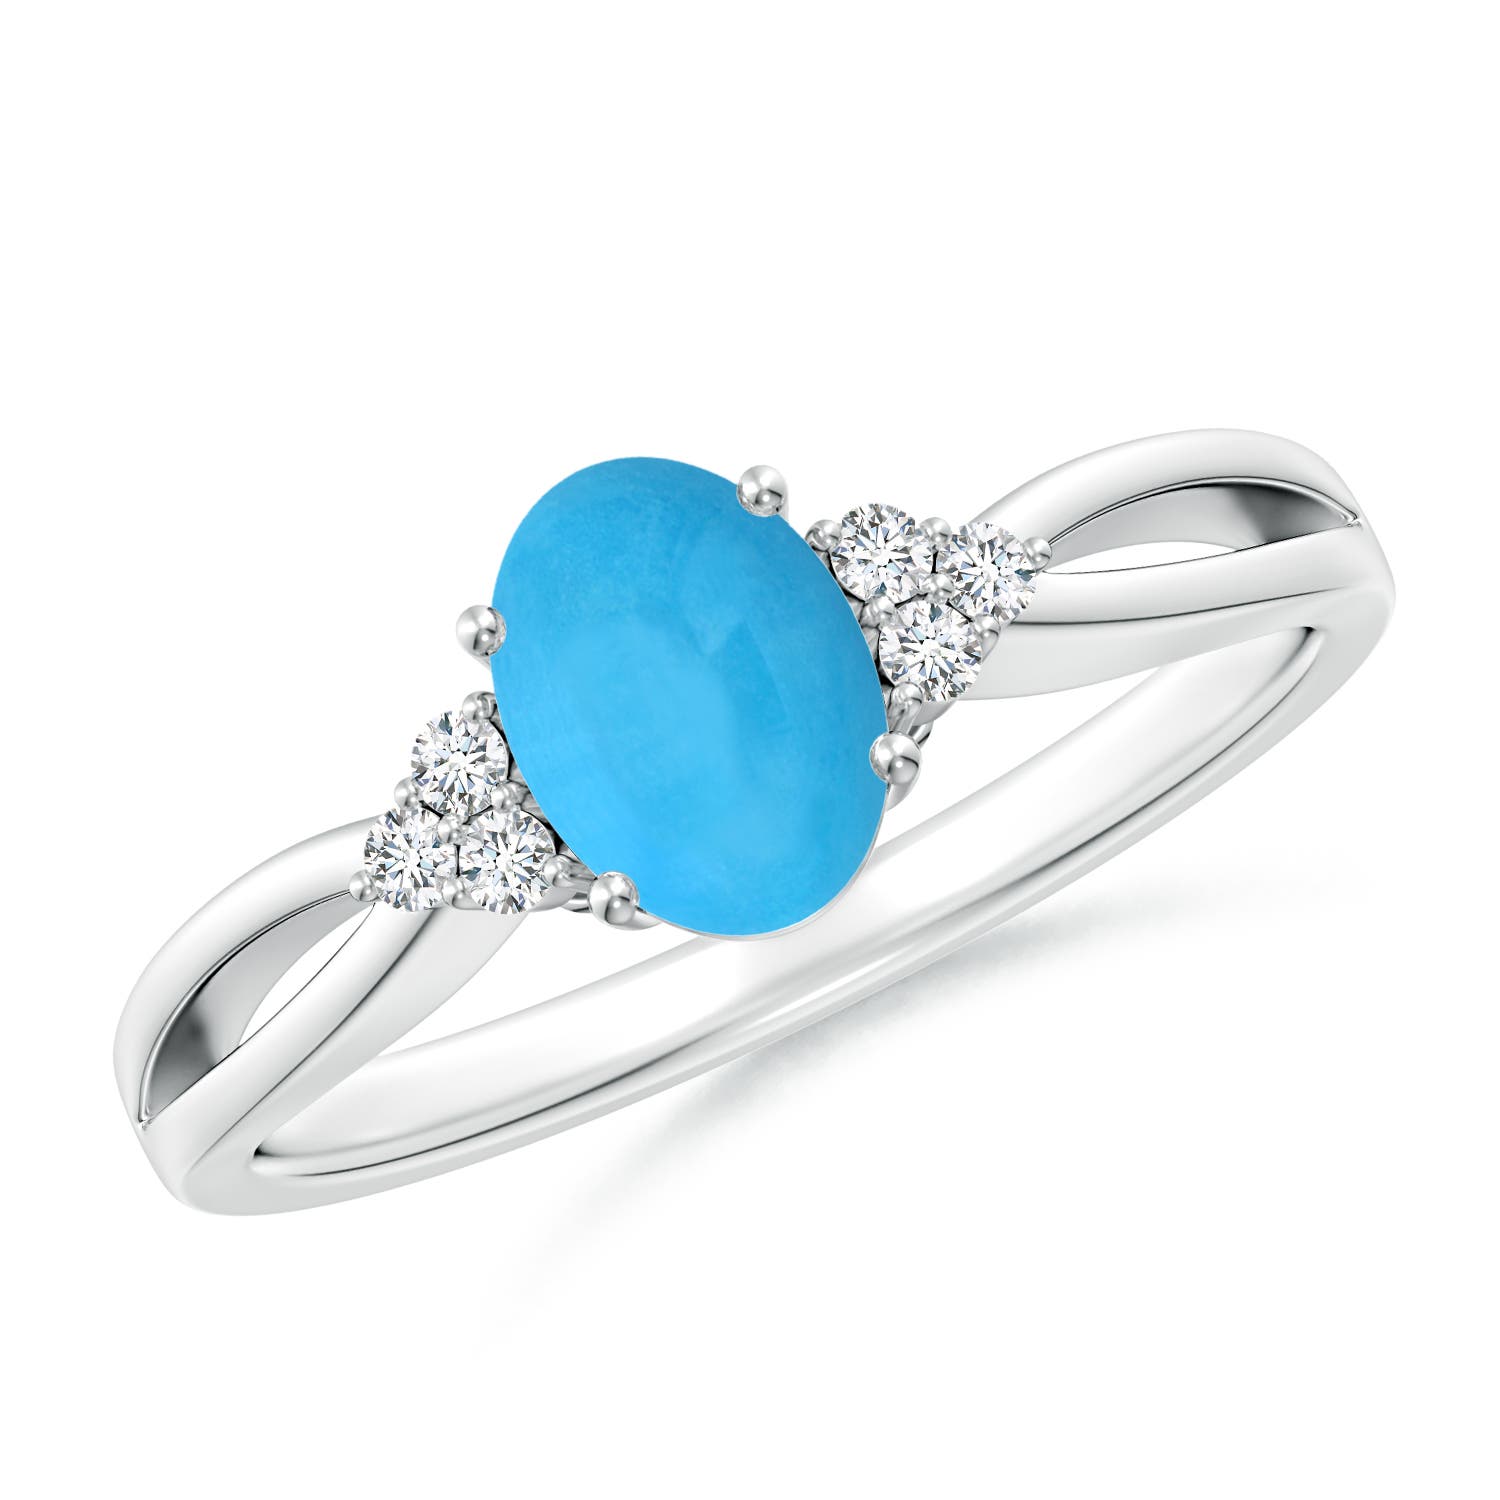 American West Leaf & Scroll Oval Turquoise Ring, Sterling Silver - QVC.com